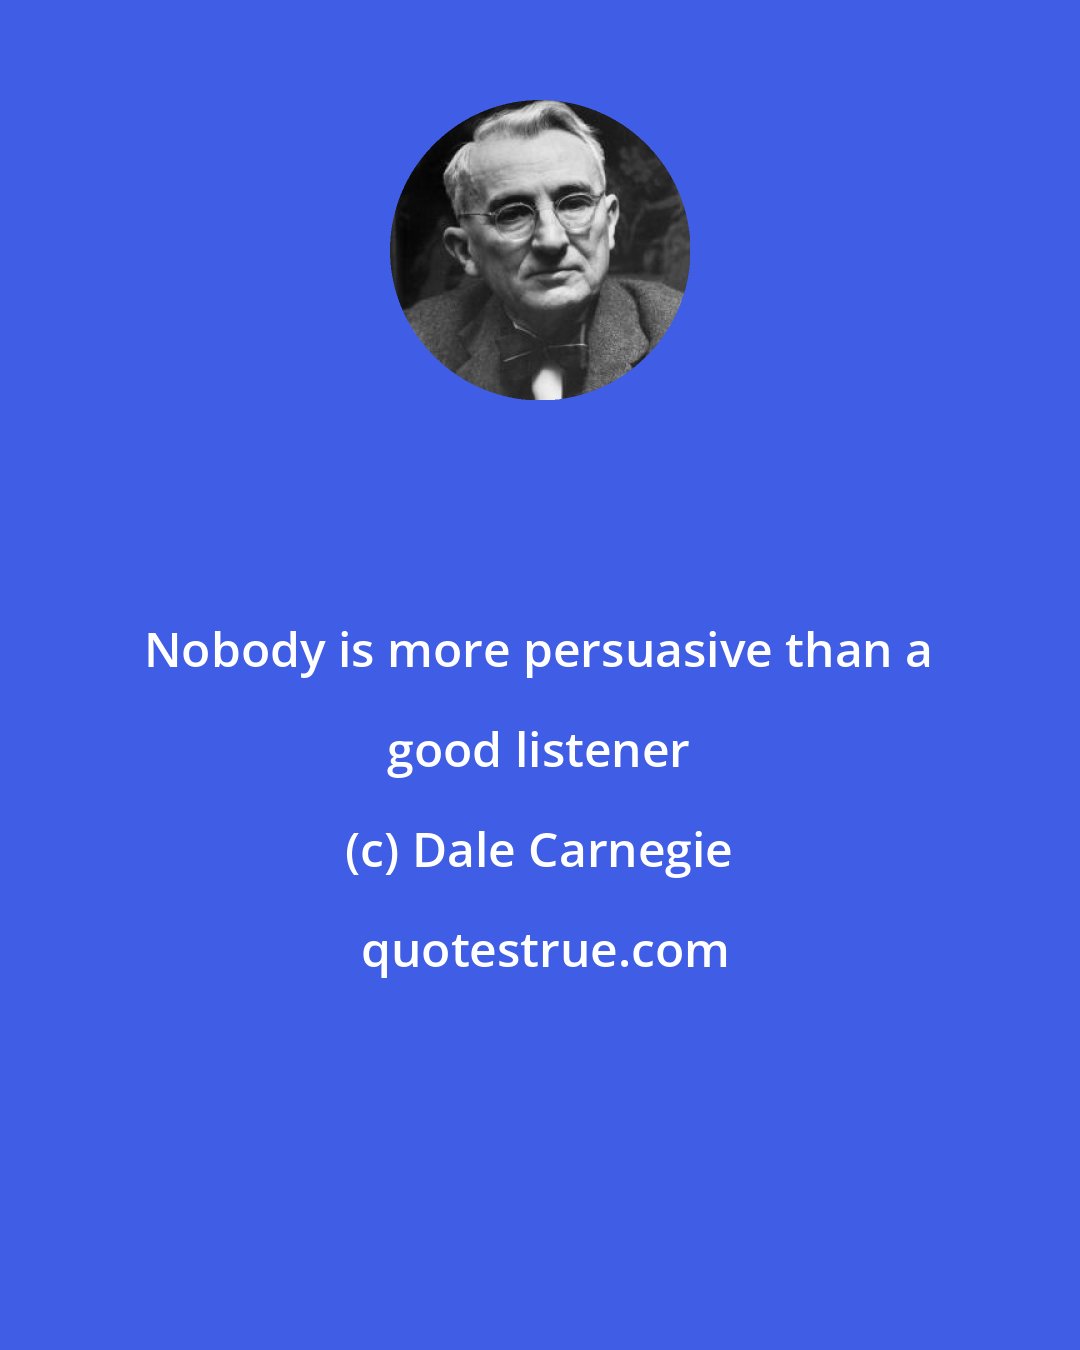 Dale Carnegie: Nobody is more persuasive than a good listener